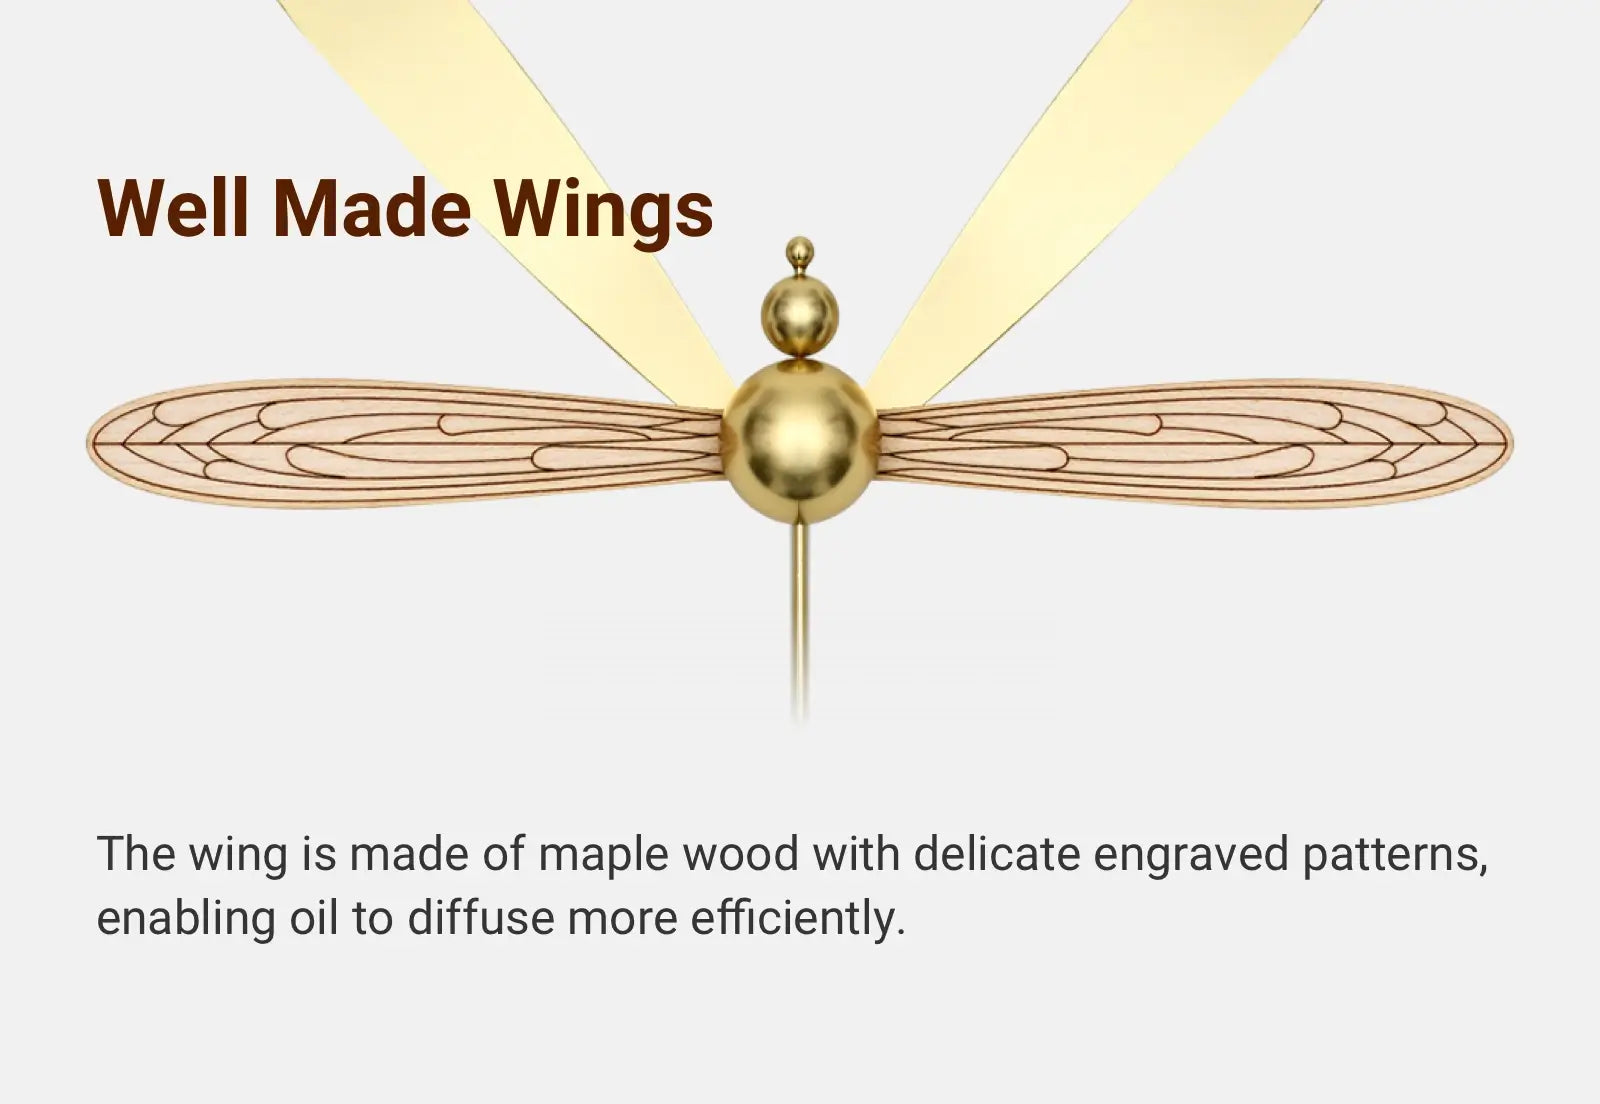 - Well Made Wings The wing is made of maple wood with delicate engraved patterns, enabling oil to diffuse more efficiently.